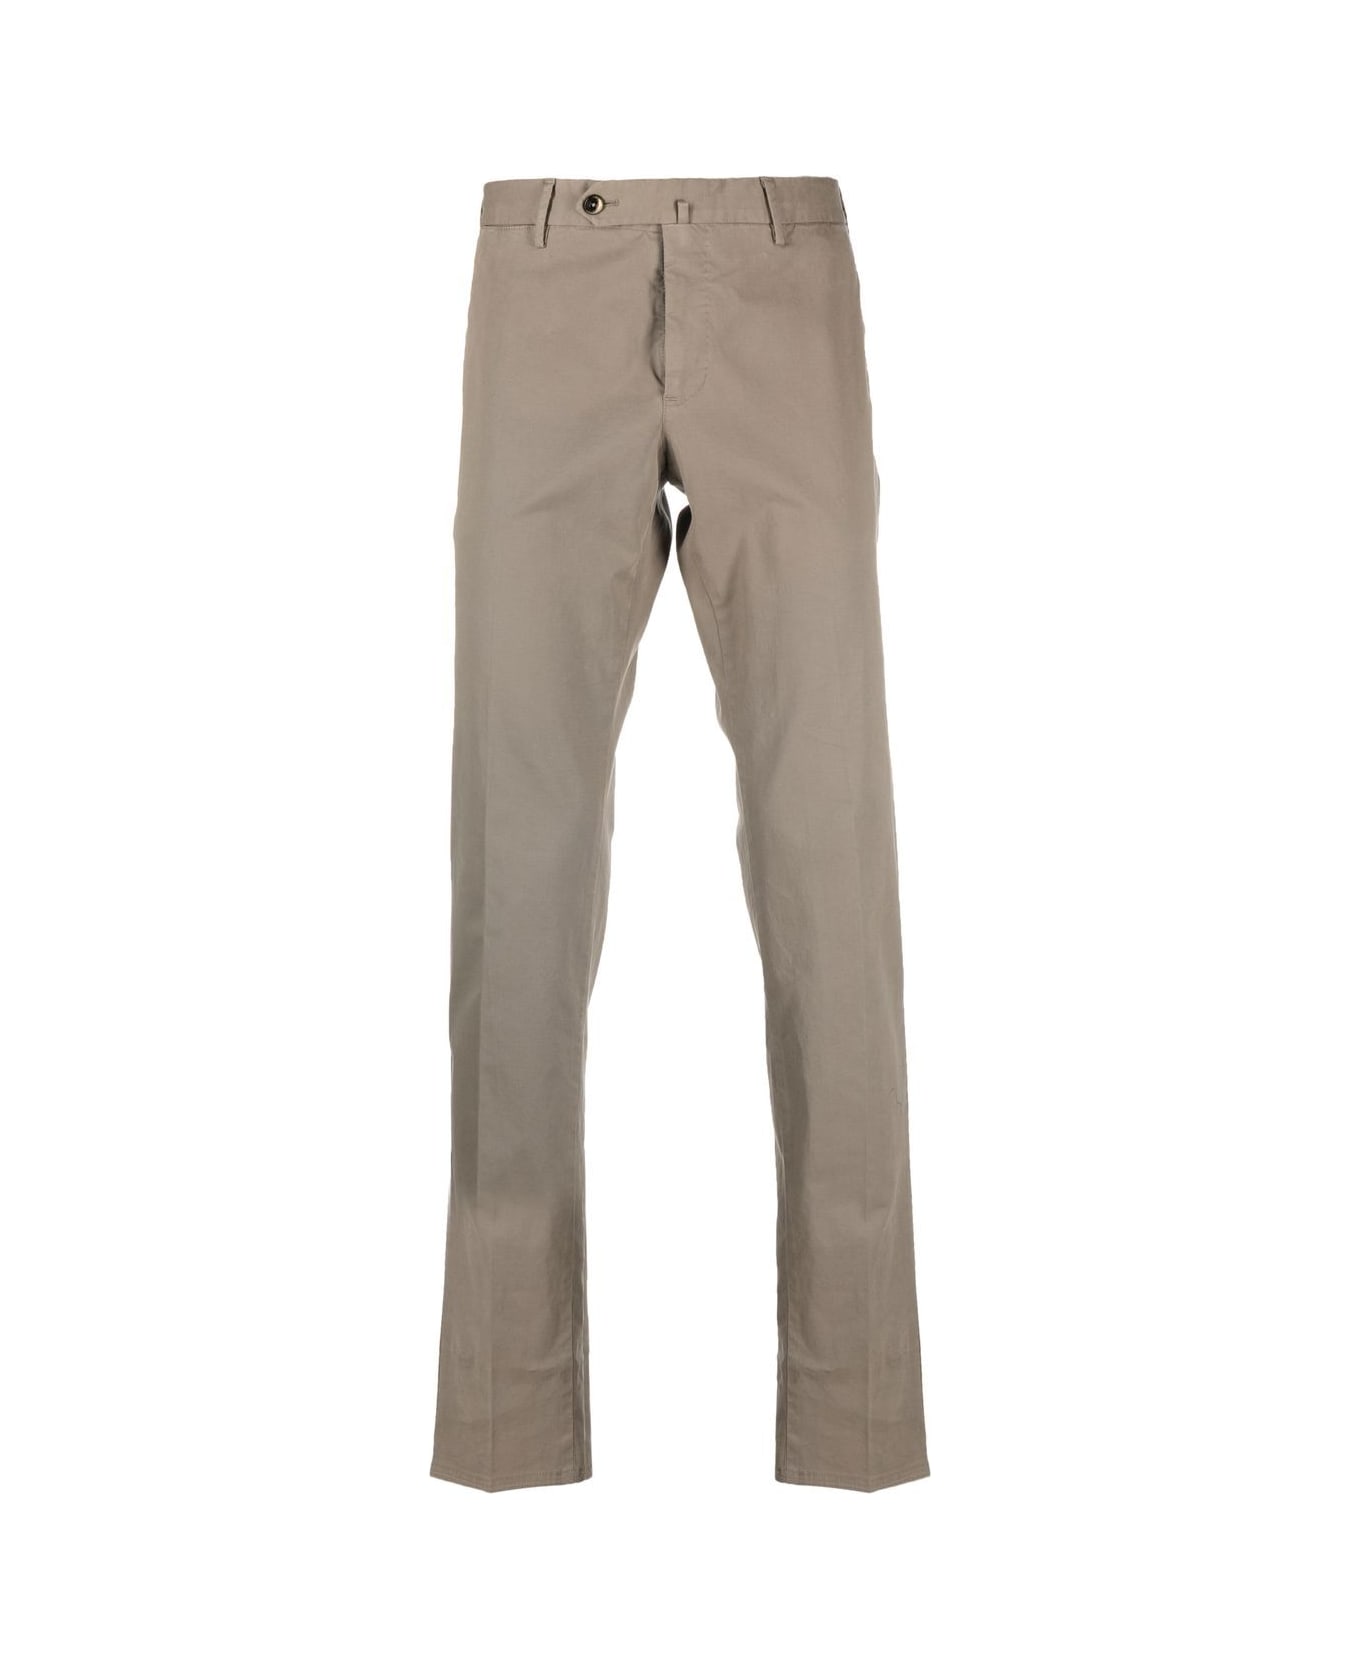 PT Torino Summer Stretch Trousers - Dove Grey ボトムス